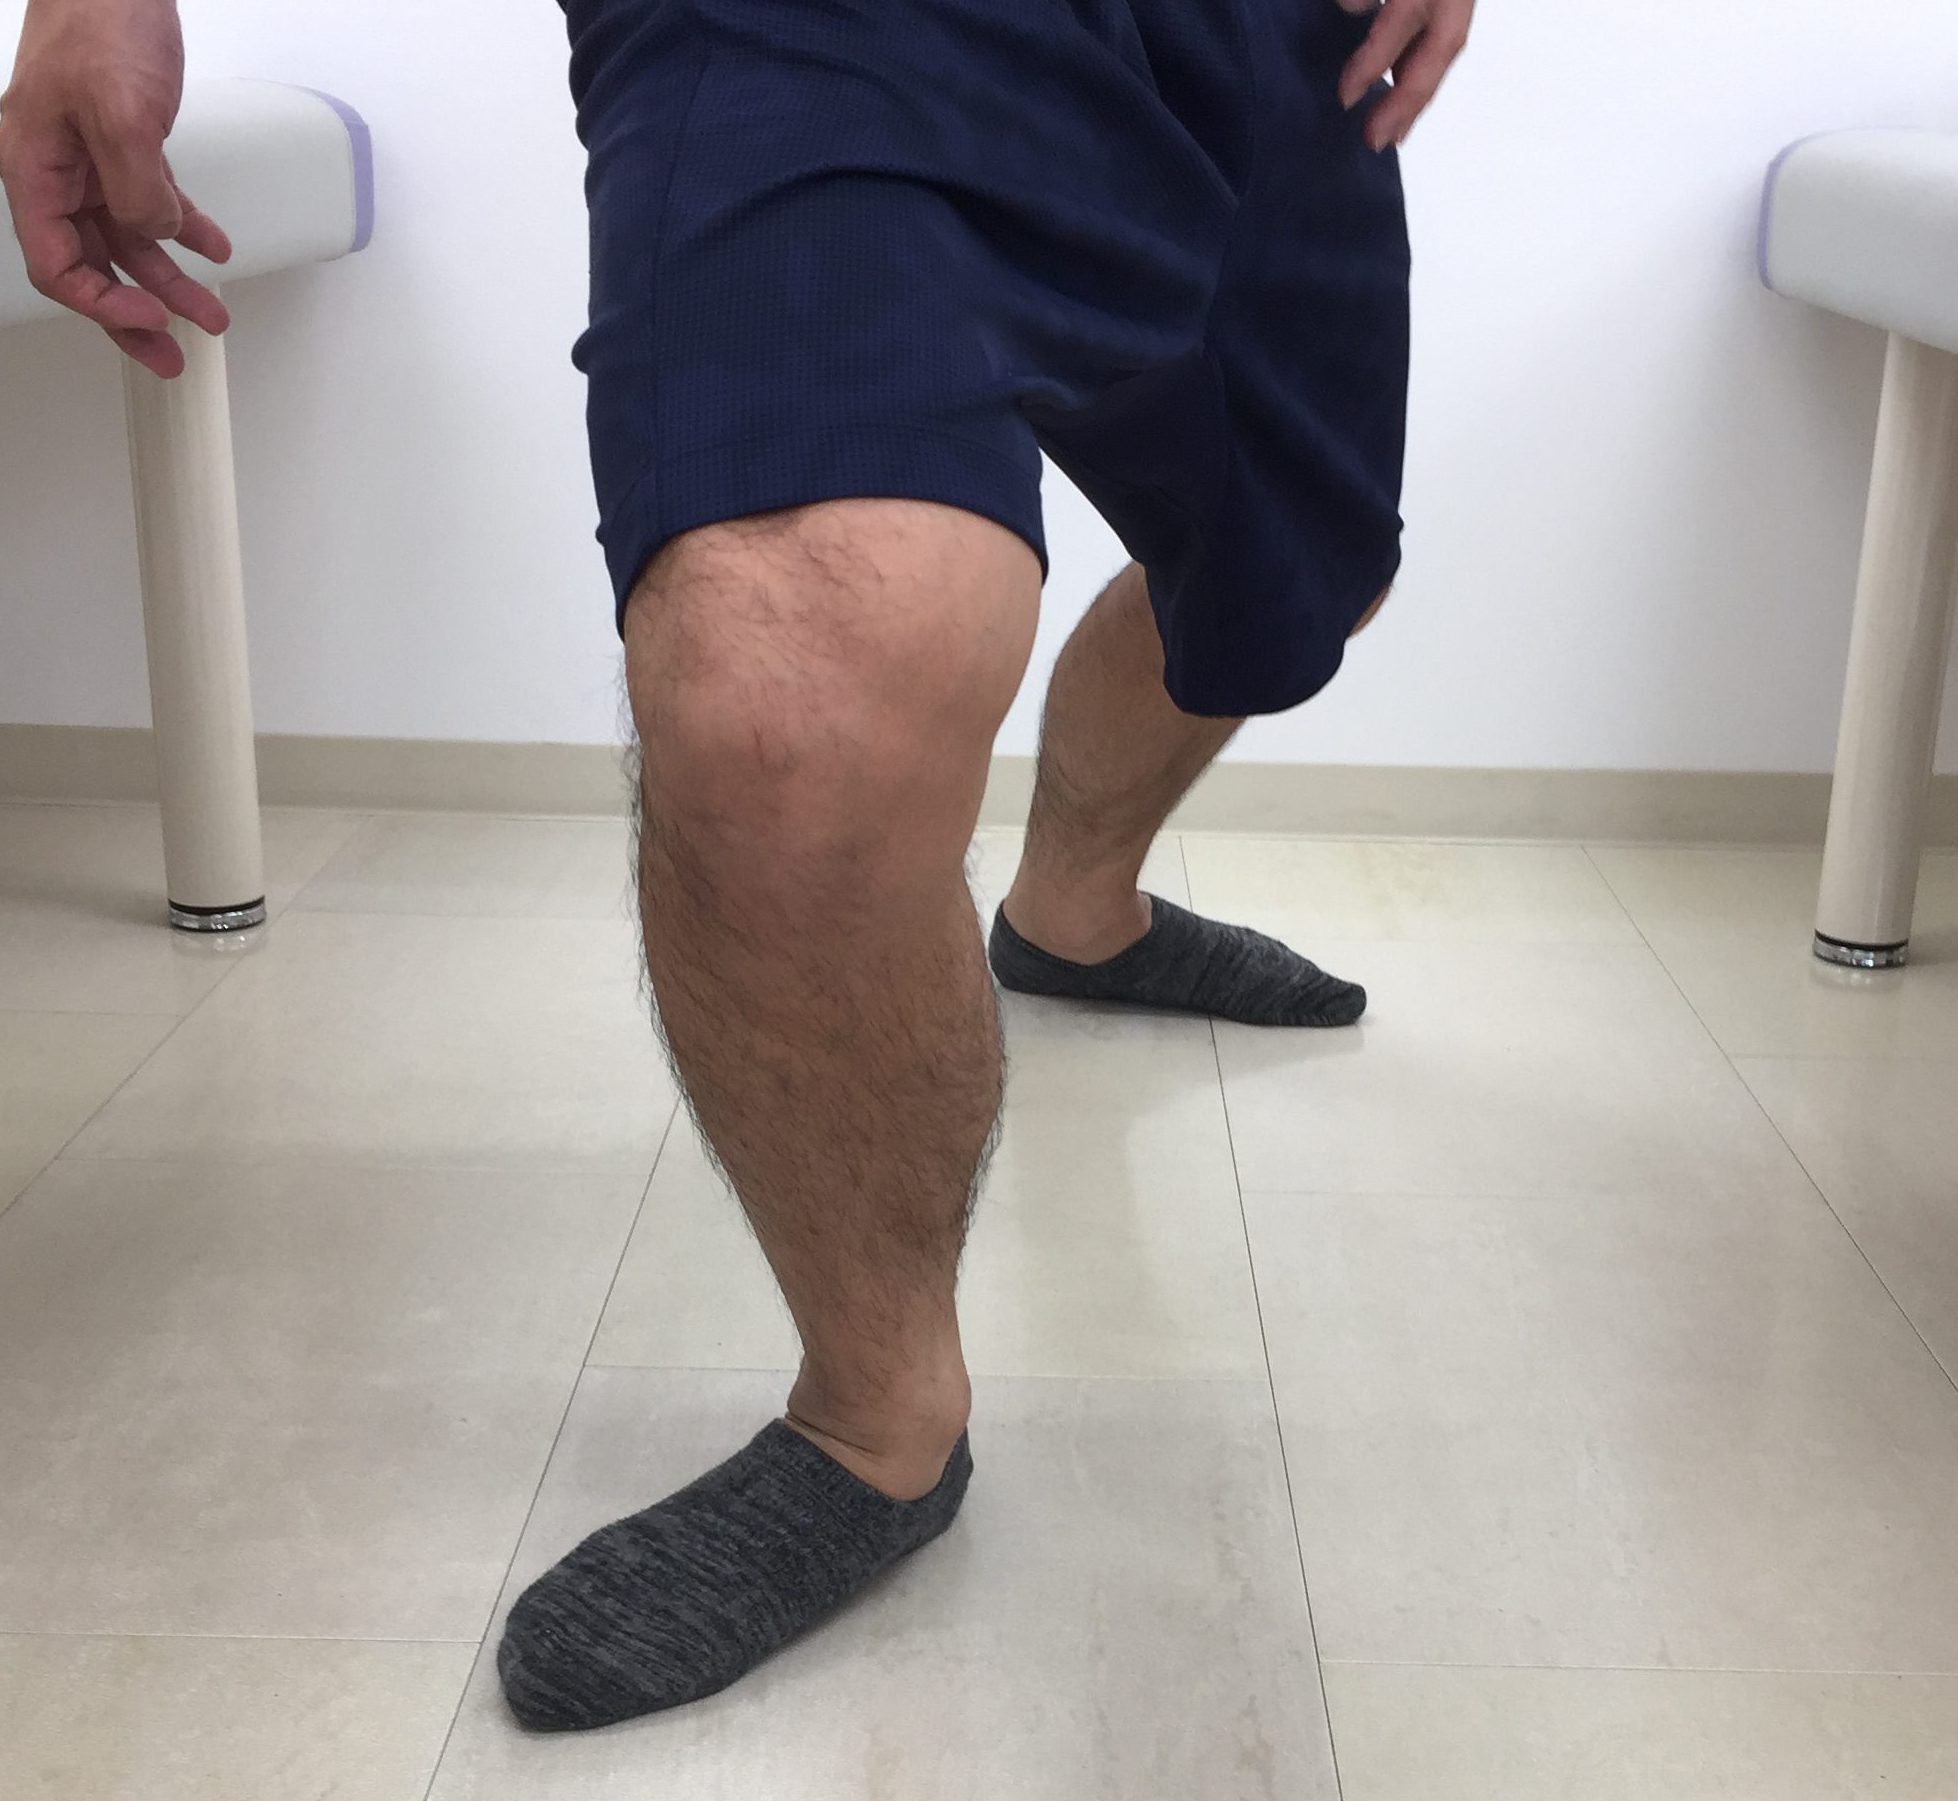 toe out knee in　腸脛靭帯炎　早く治す